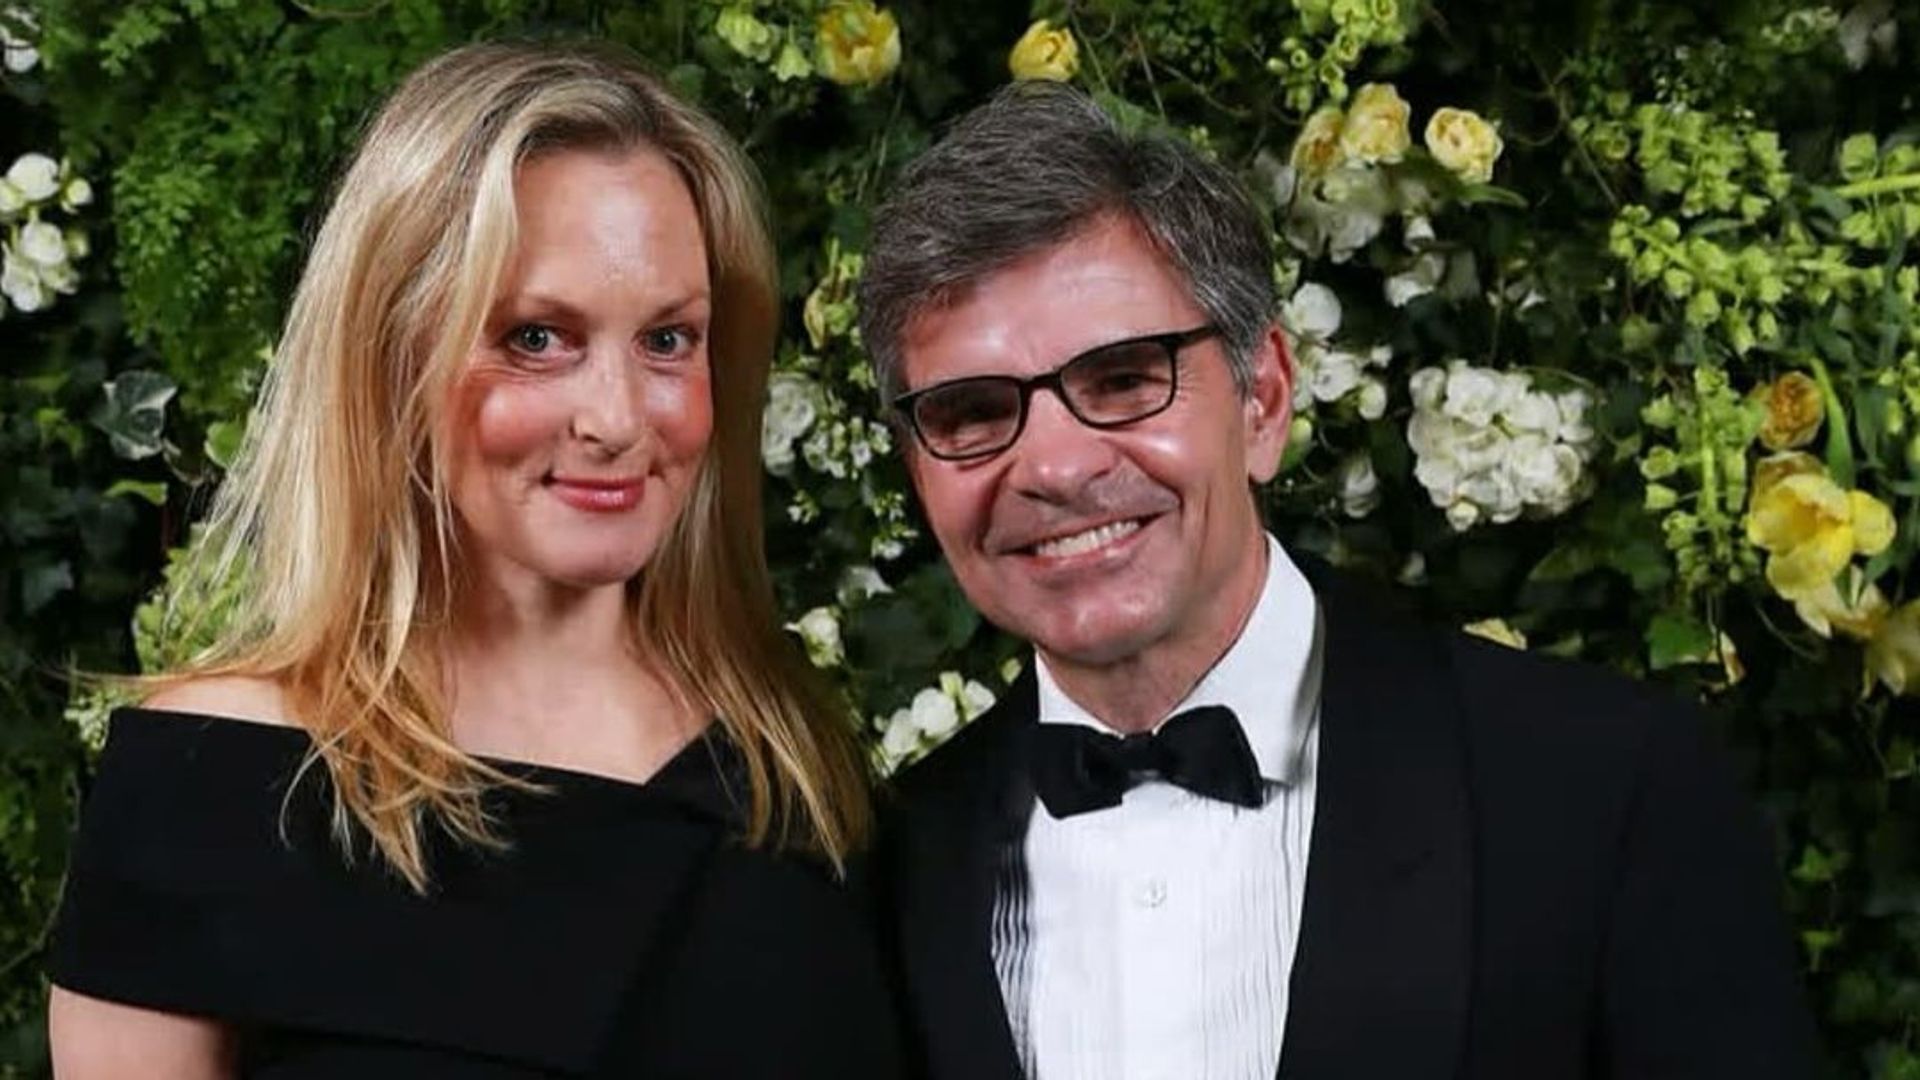 GMA's George Stephanopoulos makes wife Ali Wentworth 'jealous' during beach trip for this unexpected reason